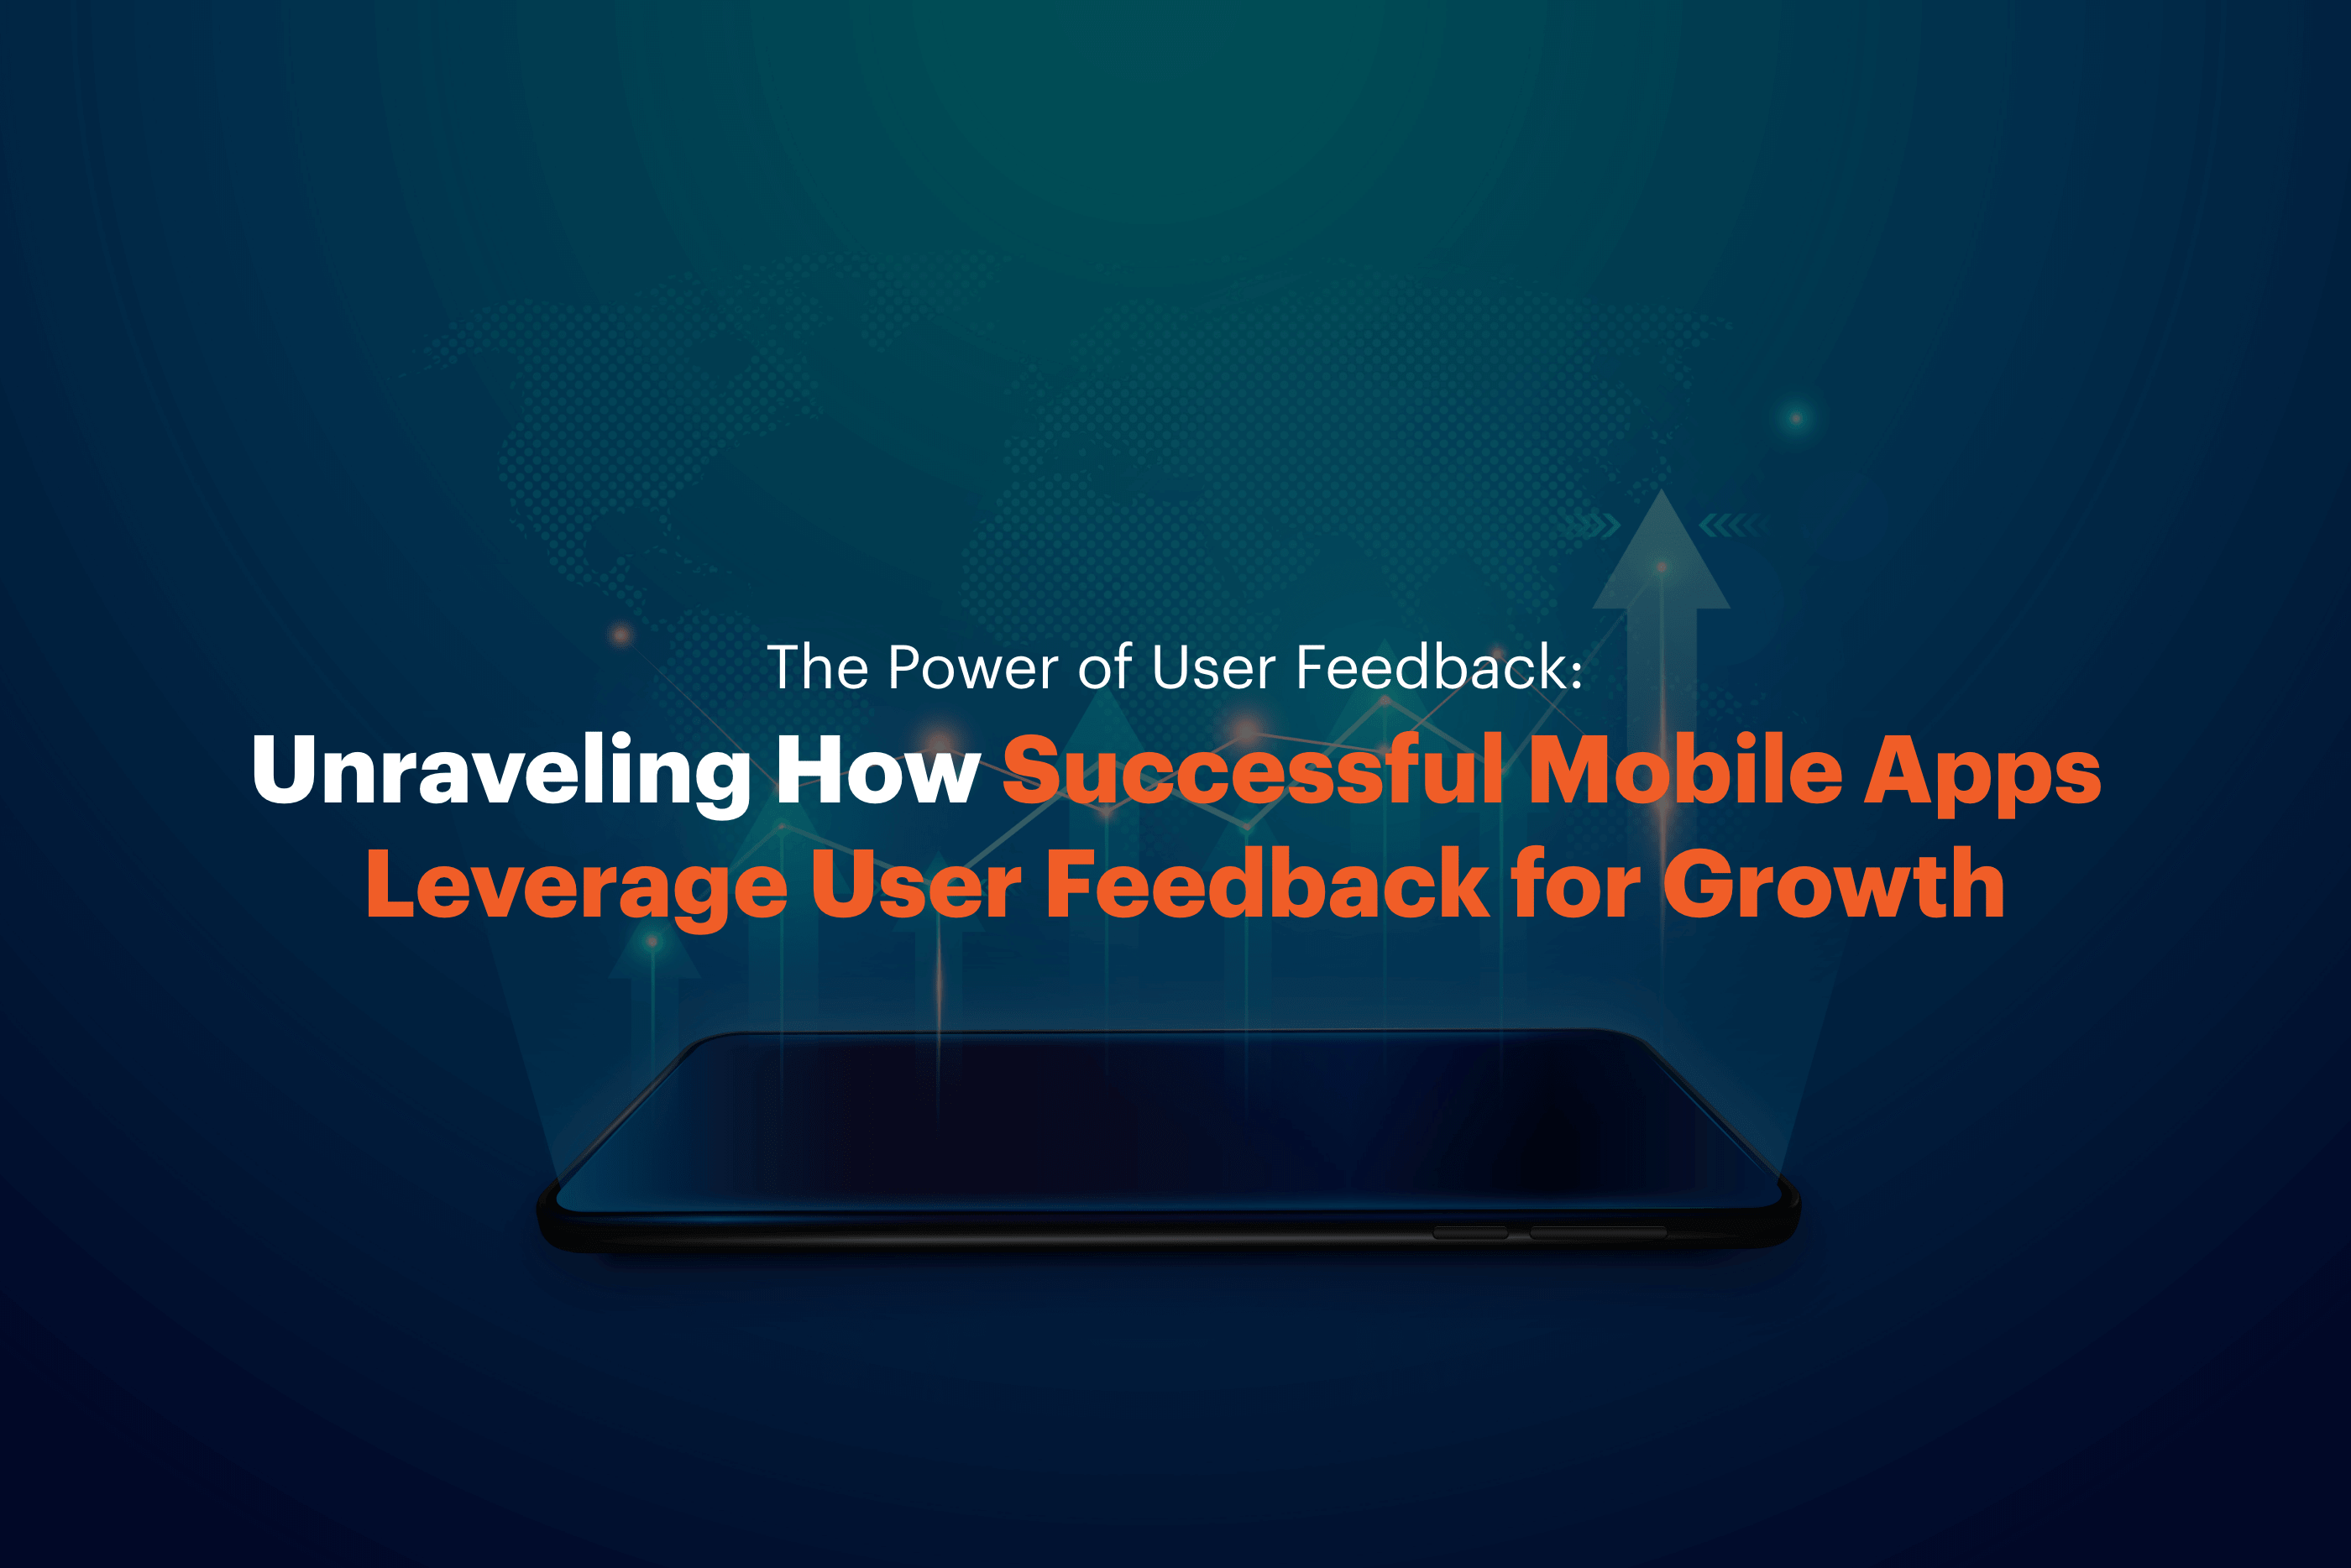 The Power of User Feedback: Unraveling How Successful Mobile Apps Leverage User Feedback for Growth